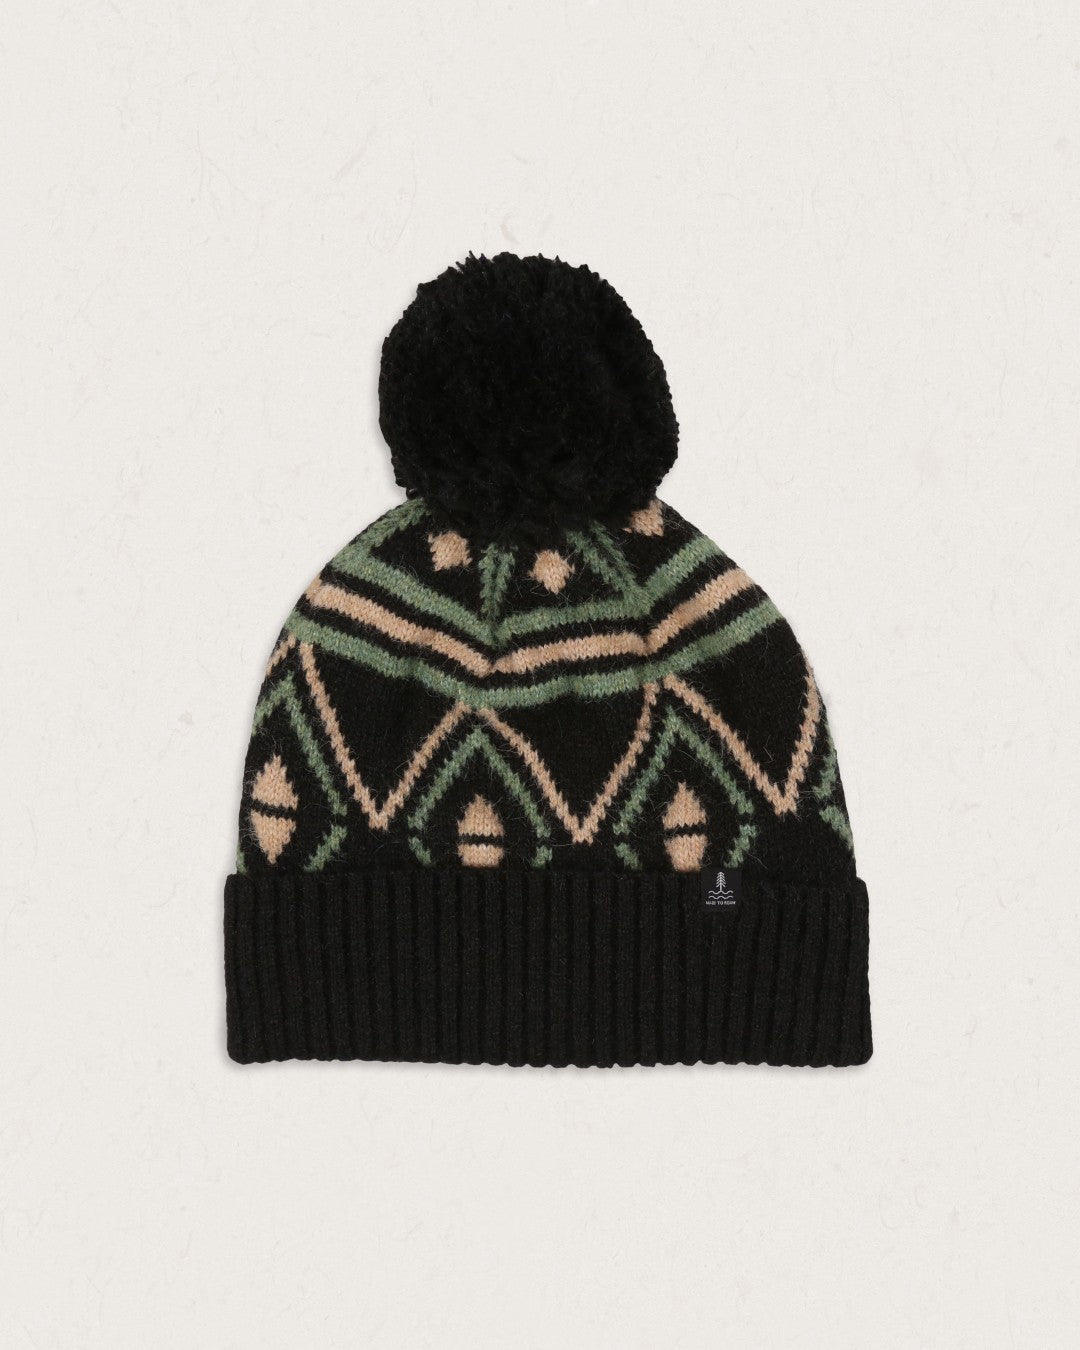 Ember Recycled Bobble Hat - Black